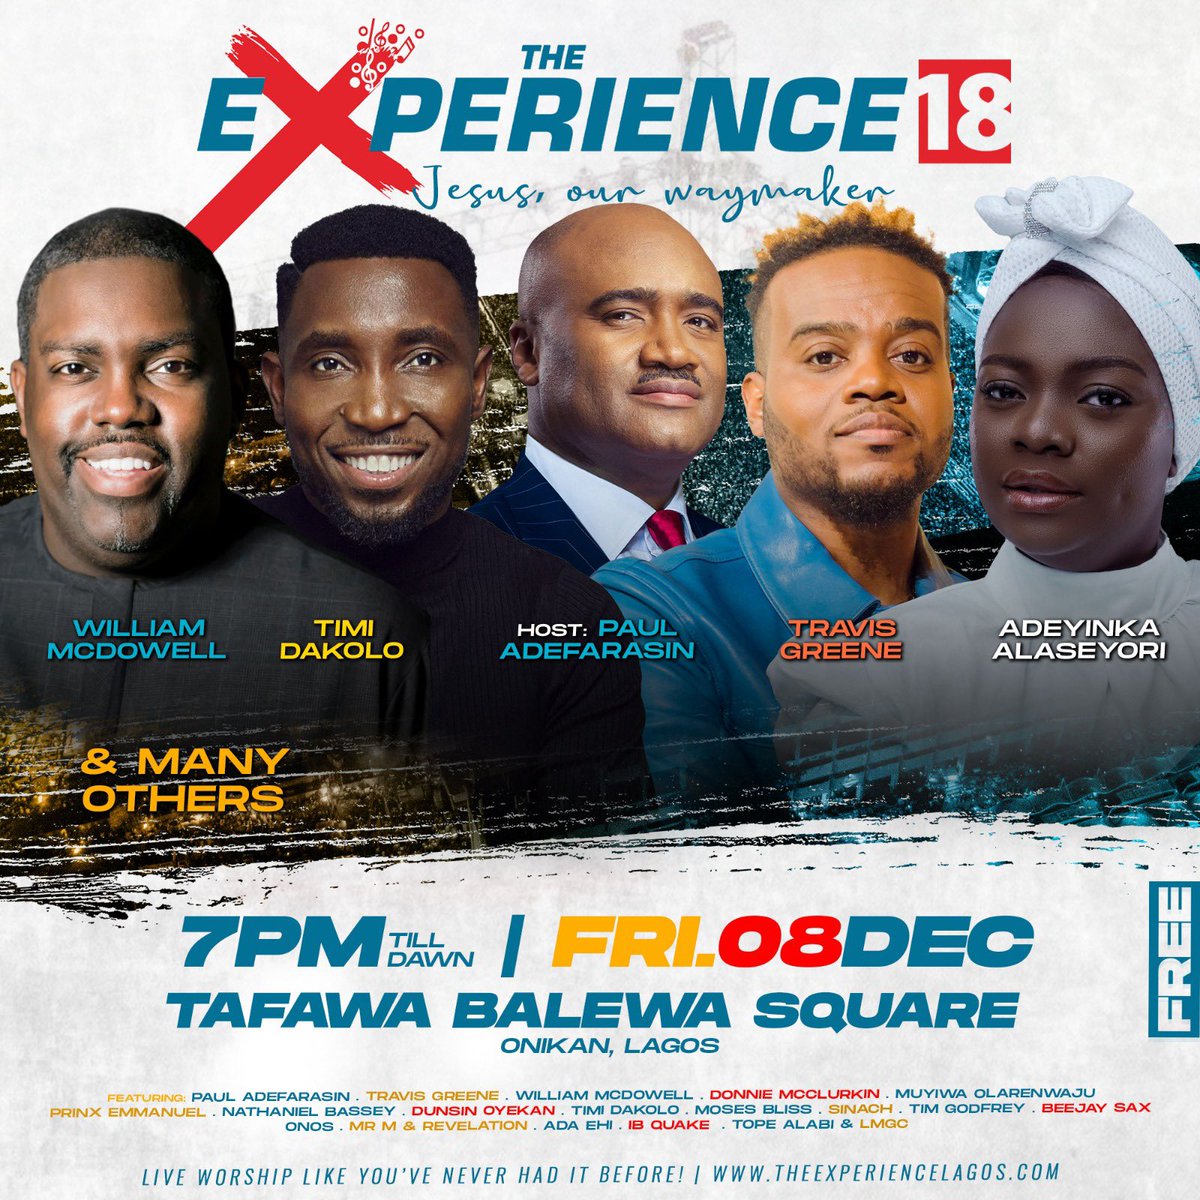 Lagos are you readyyyyyy? #TheExperience is here again, and in a few days from now, it’s going to be a praise galore. All roads lead to Tafawa Balewa Square on the 8th of December! Come, let's celebrate #JesusOurWayMaker. #TE18 #HOTR